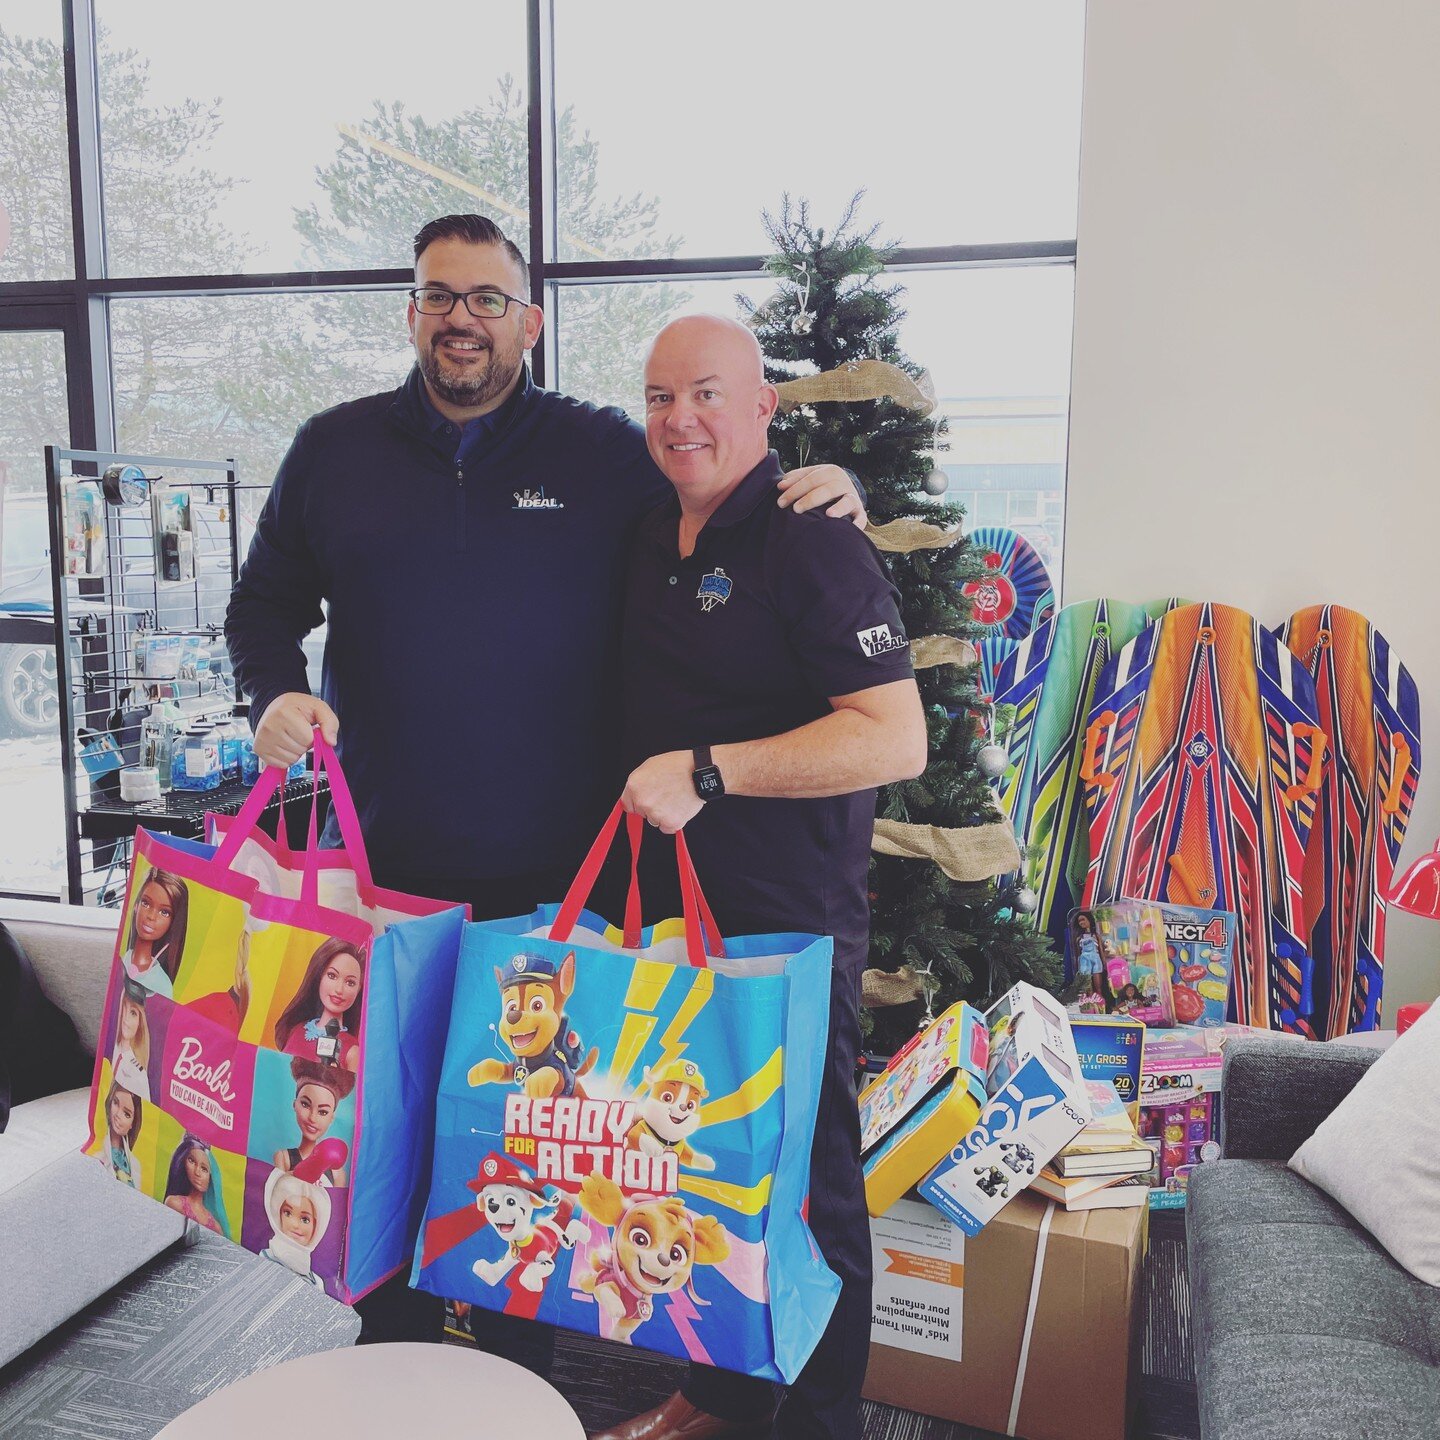 🎁✨ Spreading Holiday Joy with @ideal_electrical and @Sean! 🤝🎄

This Christmas, we're thrilled to announce that @ideal_electrical has generously donated a sleigh-load of toys to our toy drive! 🎅🚀 Thanks to their incredible support, 15 little hear